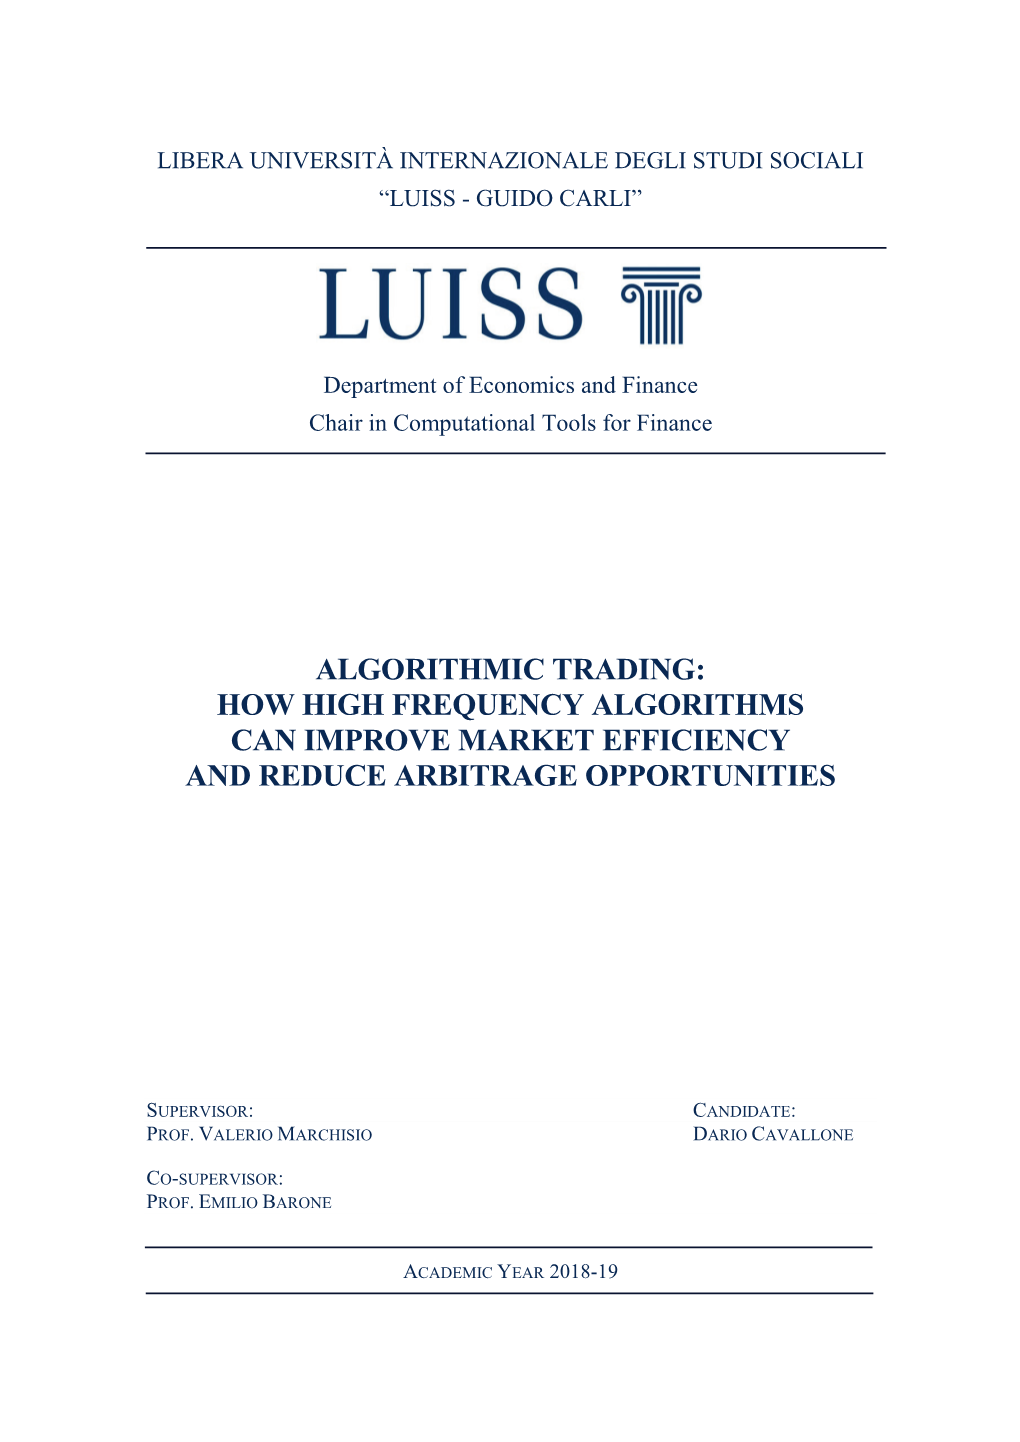 Algorithmic Trading: How High Frequency Algorithms Can Improve Market Efficiency and Reduce Arbitrage Opportunities